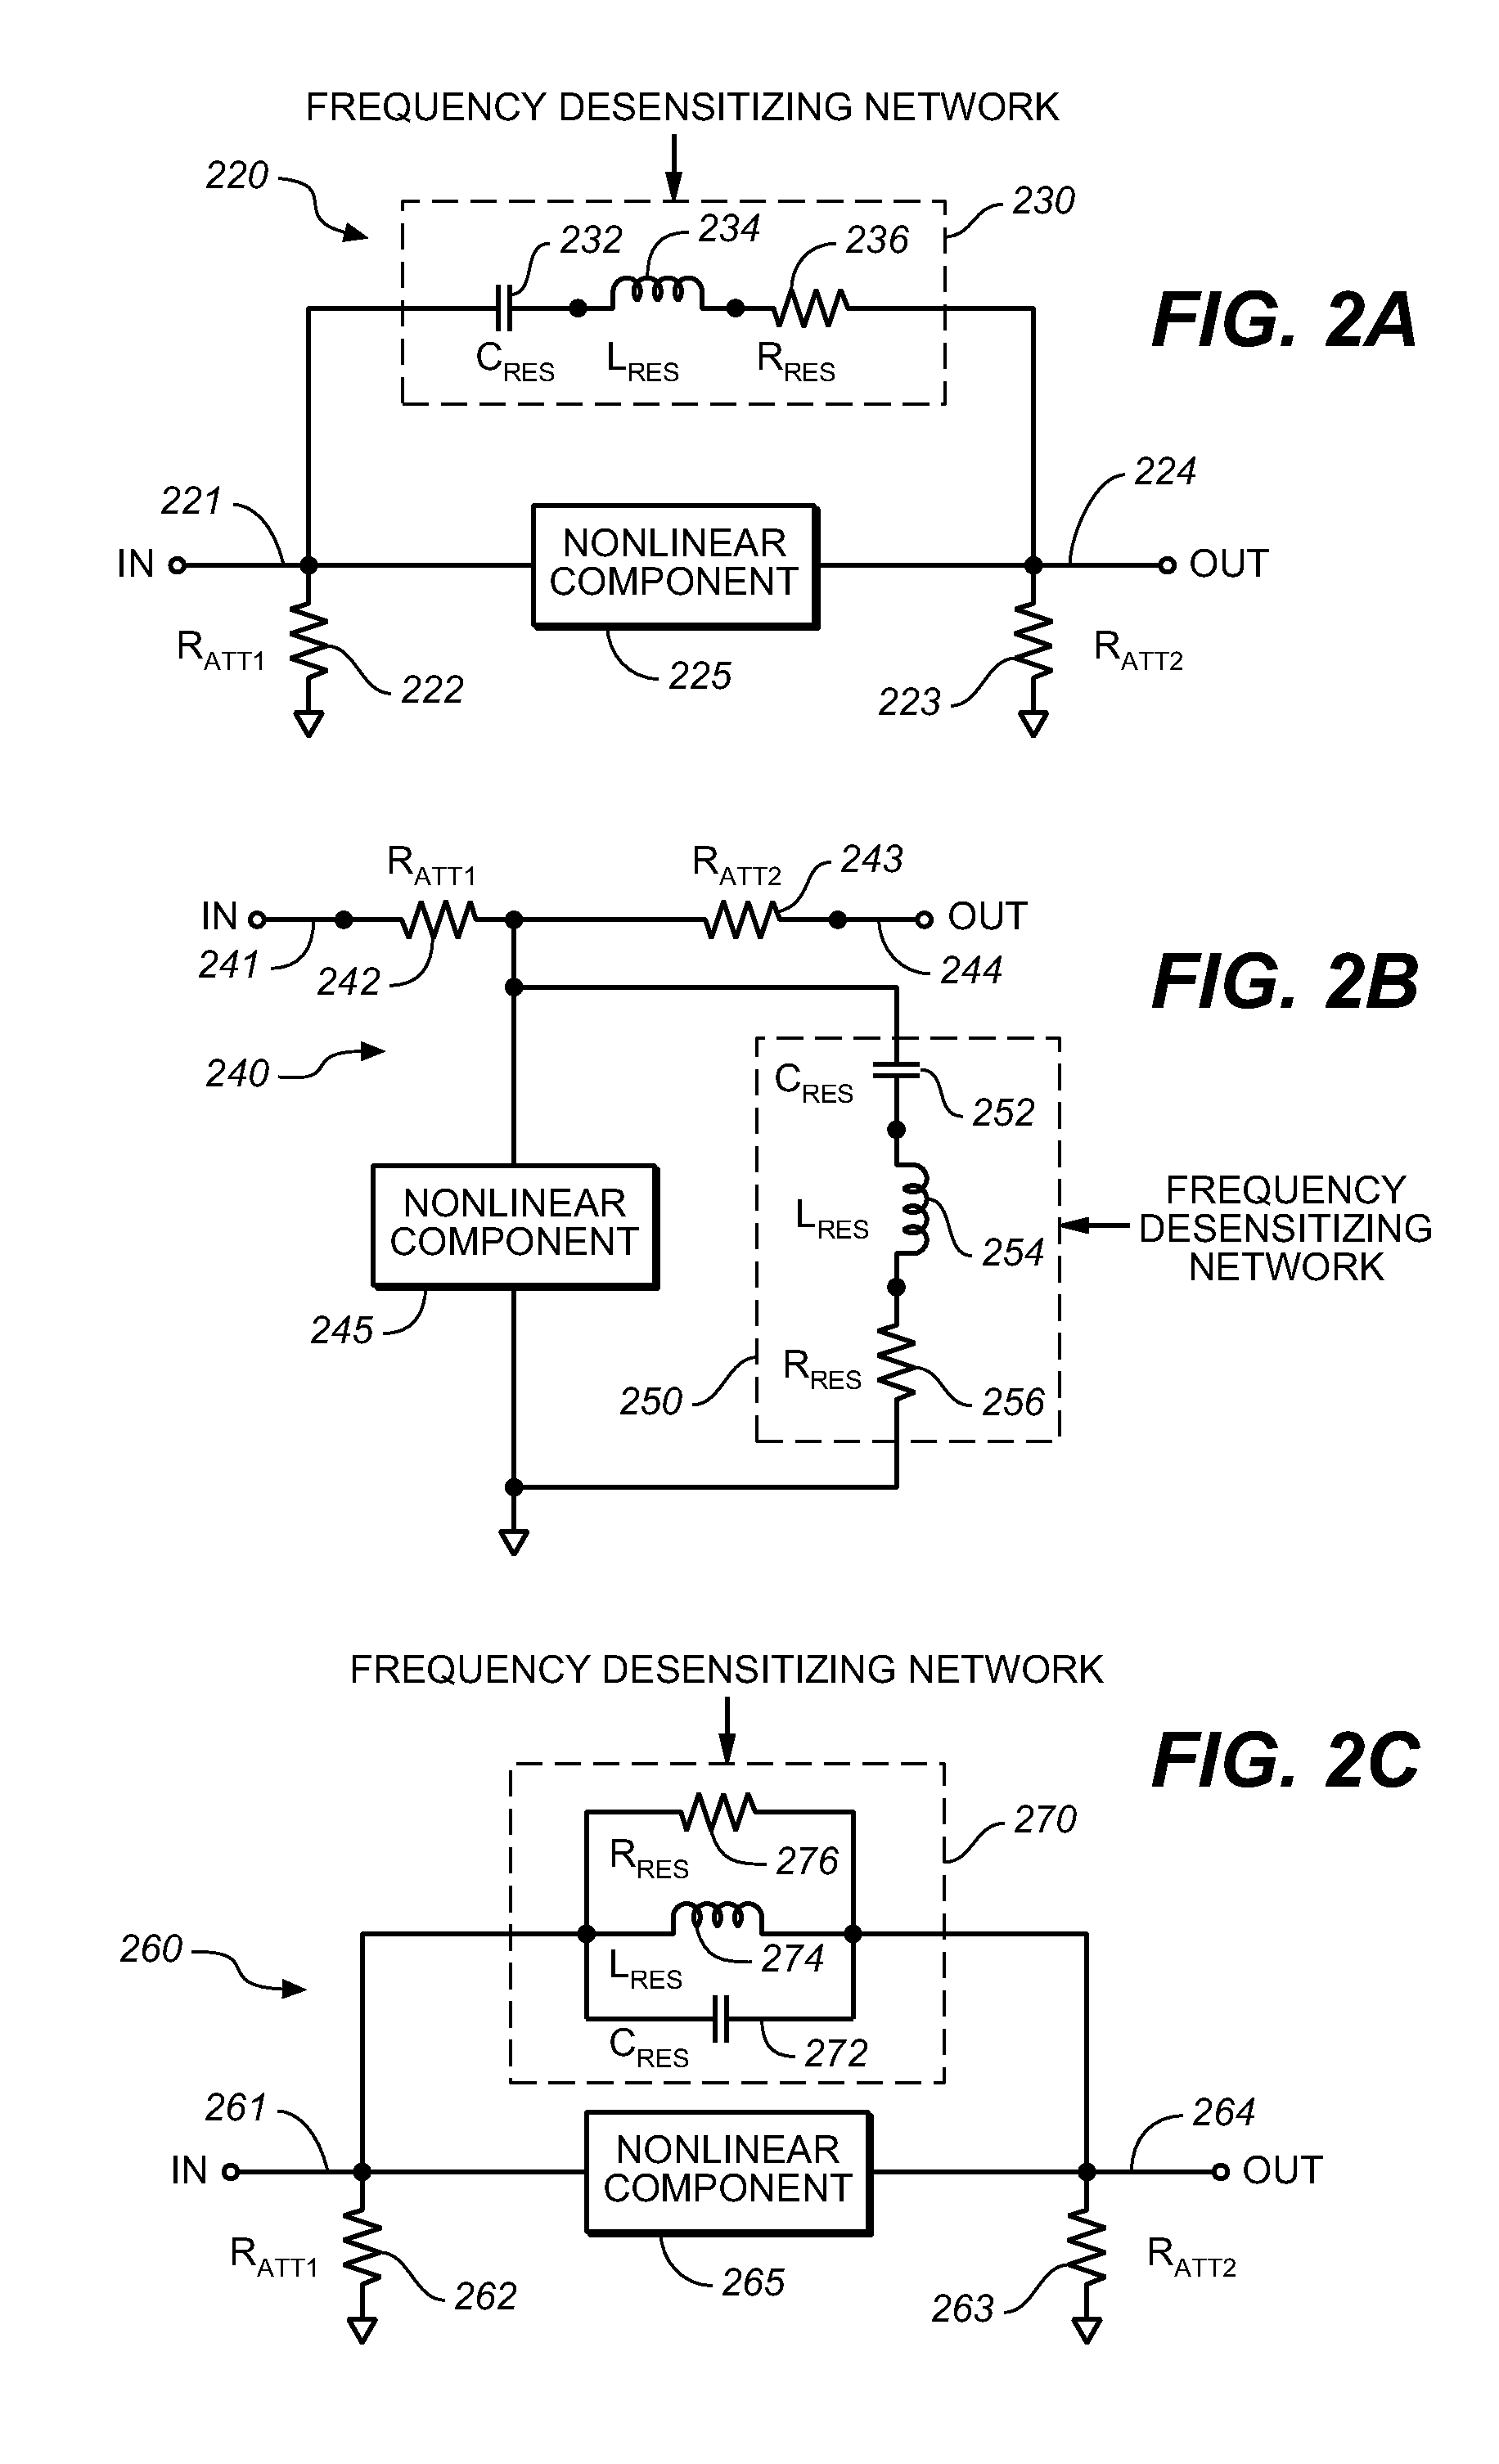 Frequency-Desensitizer for Broadband Predistortion Linearizers